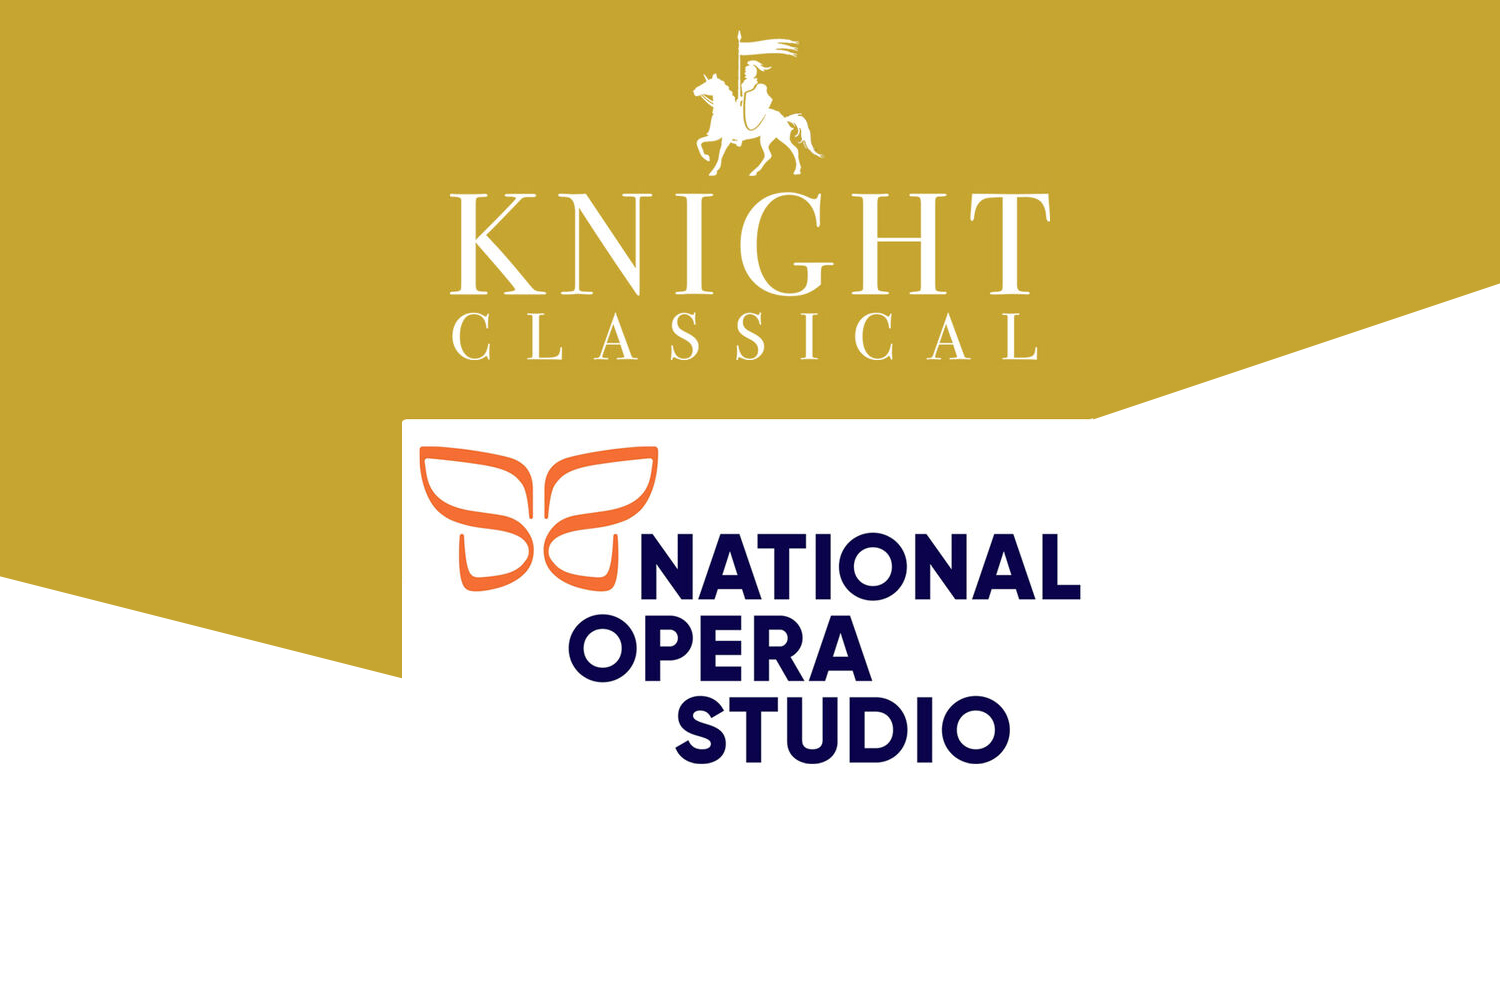 Knight Classical Partner with National Opera Studio for Premium Filming Package